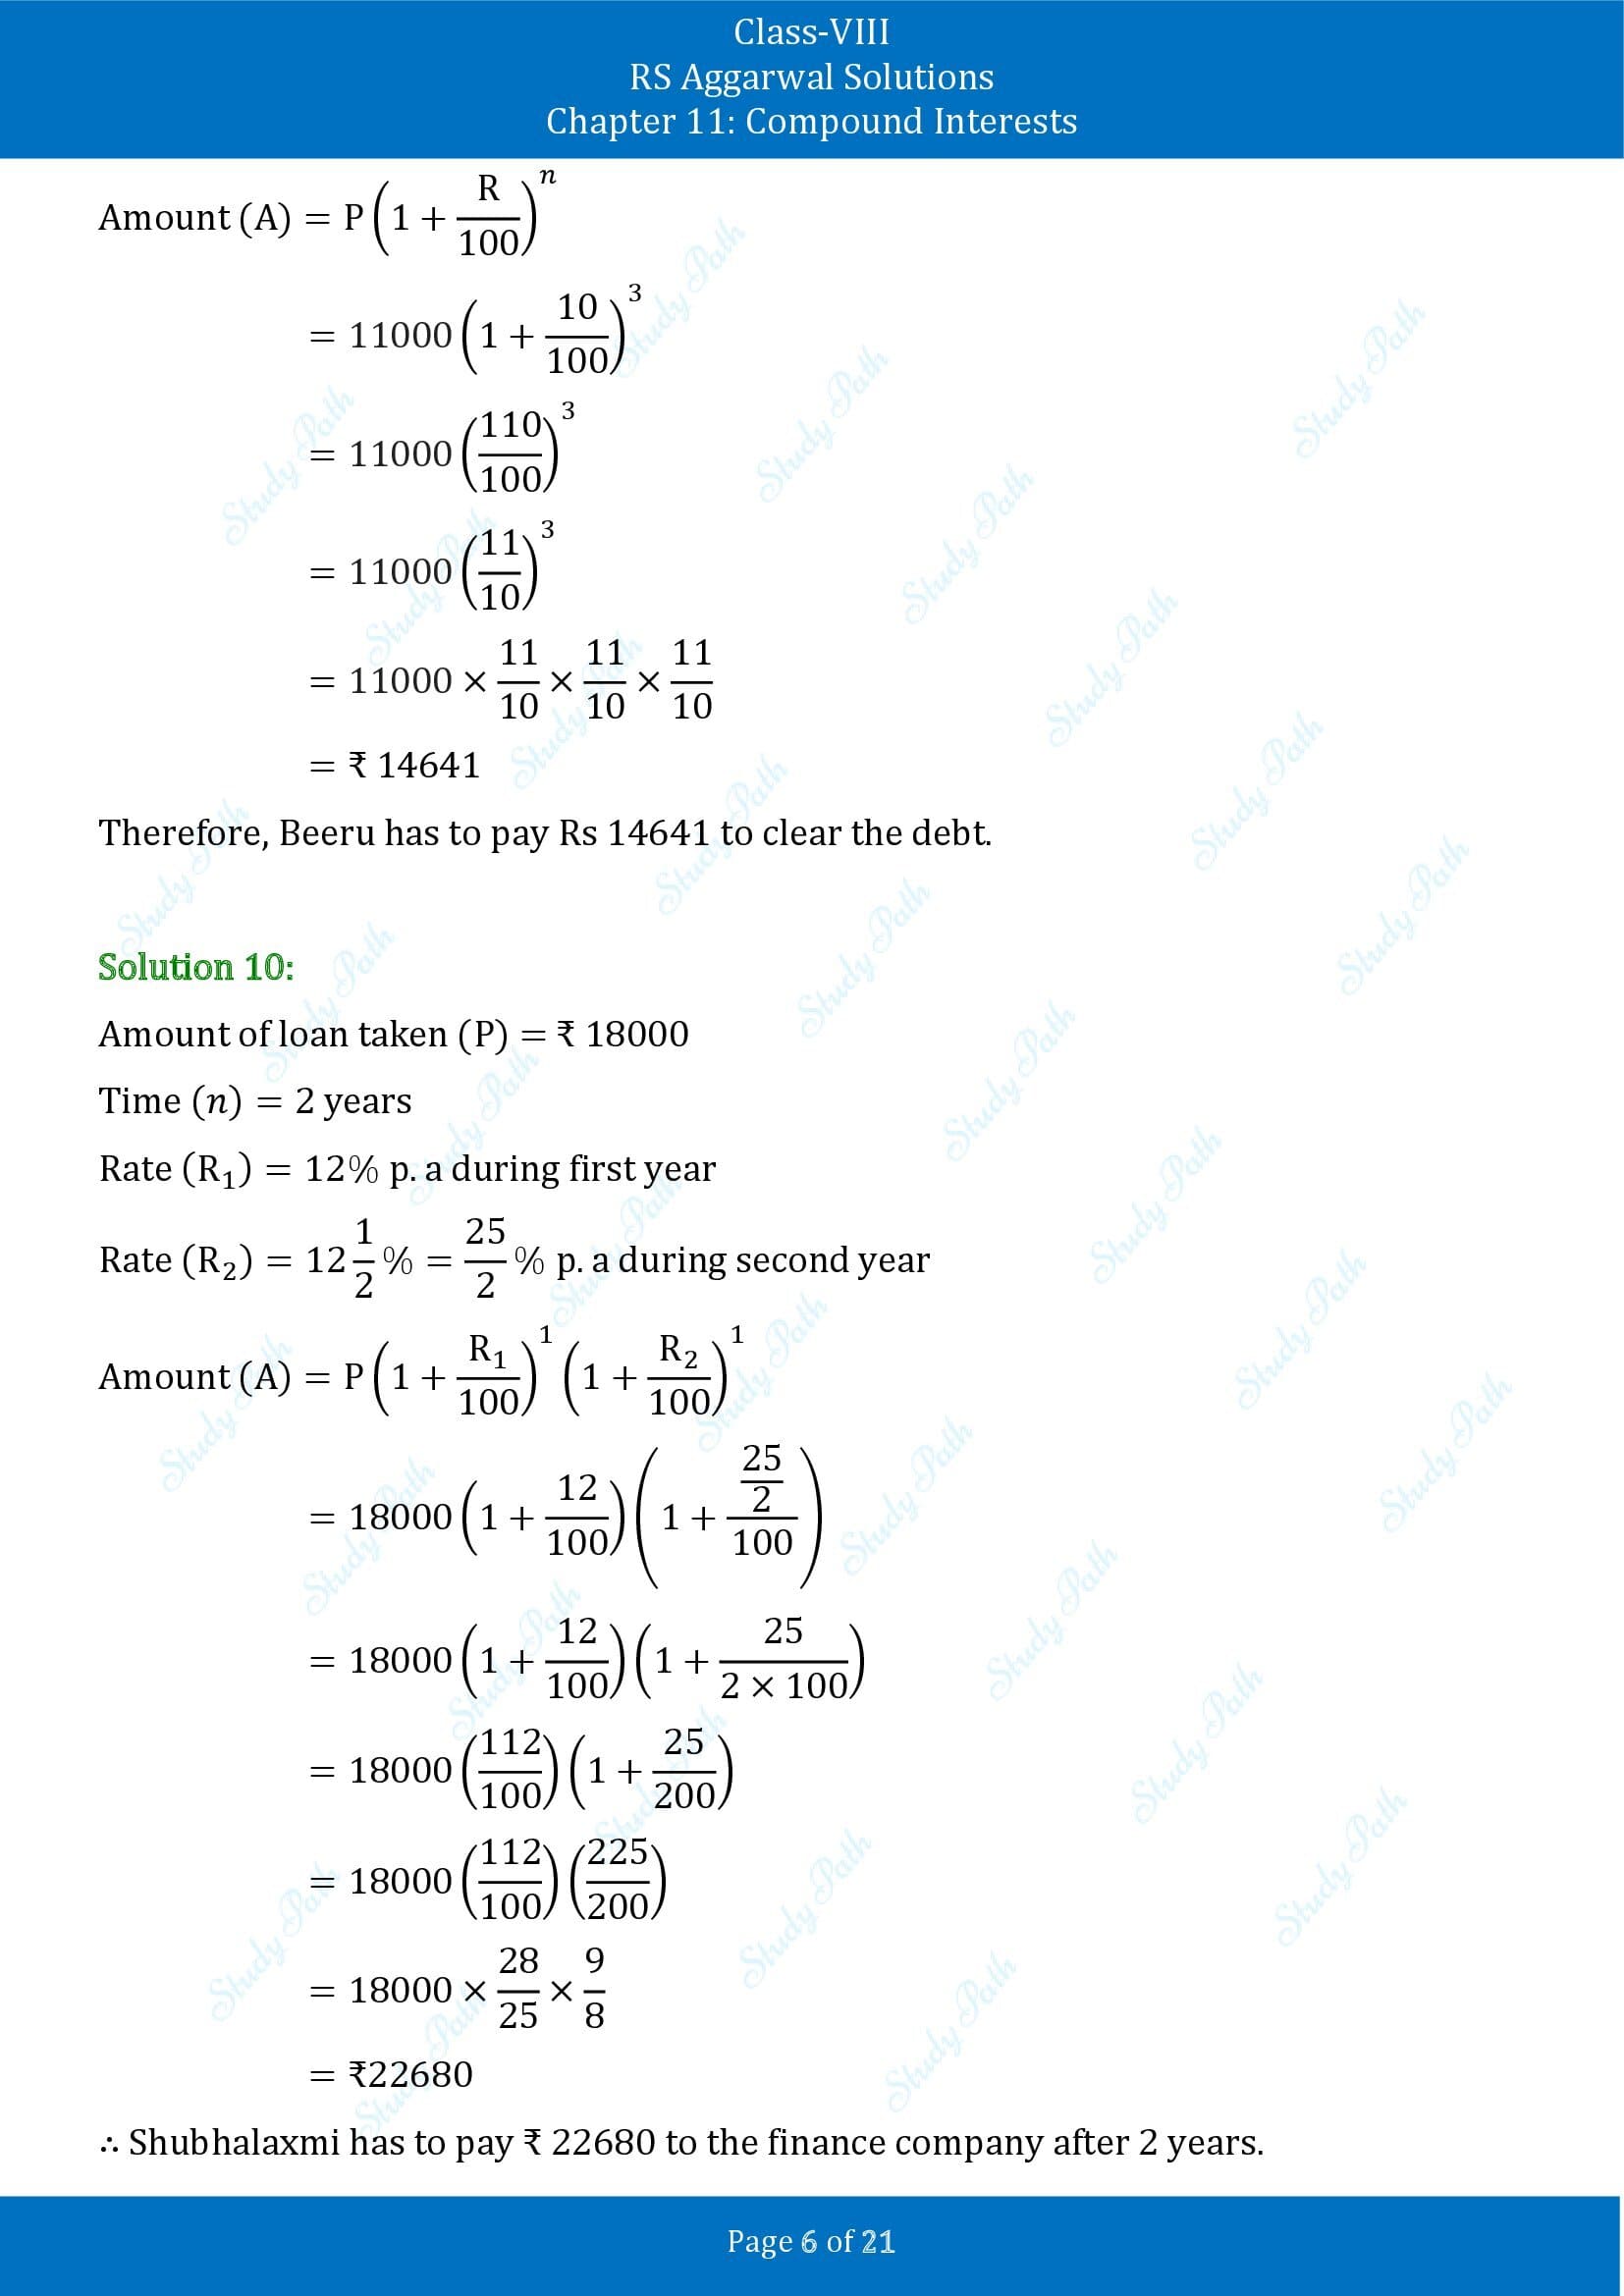 RS Aggarwal Solutions Class 8 Chapter 11 Compound Interests Exercise 11B 00006